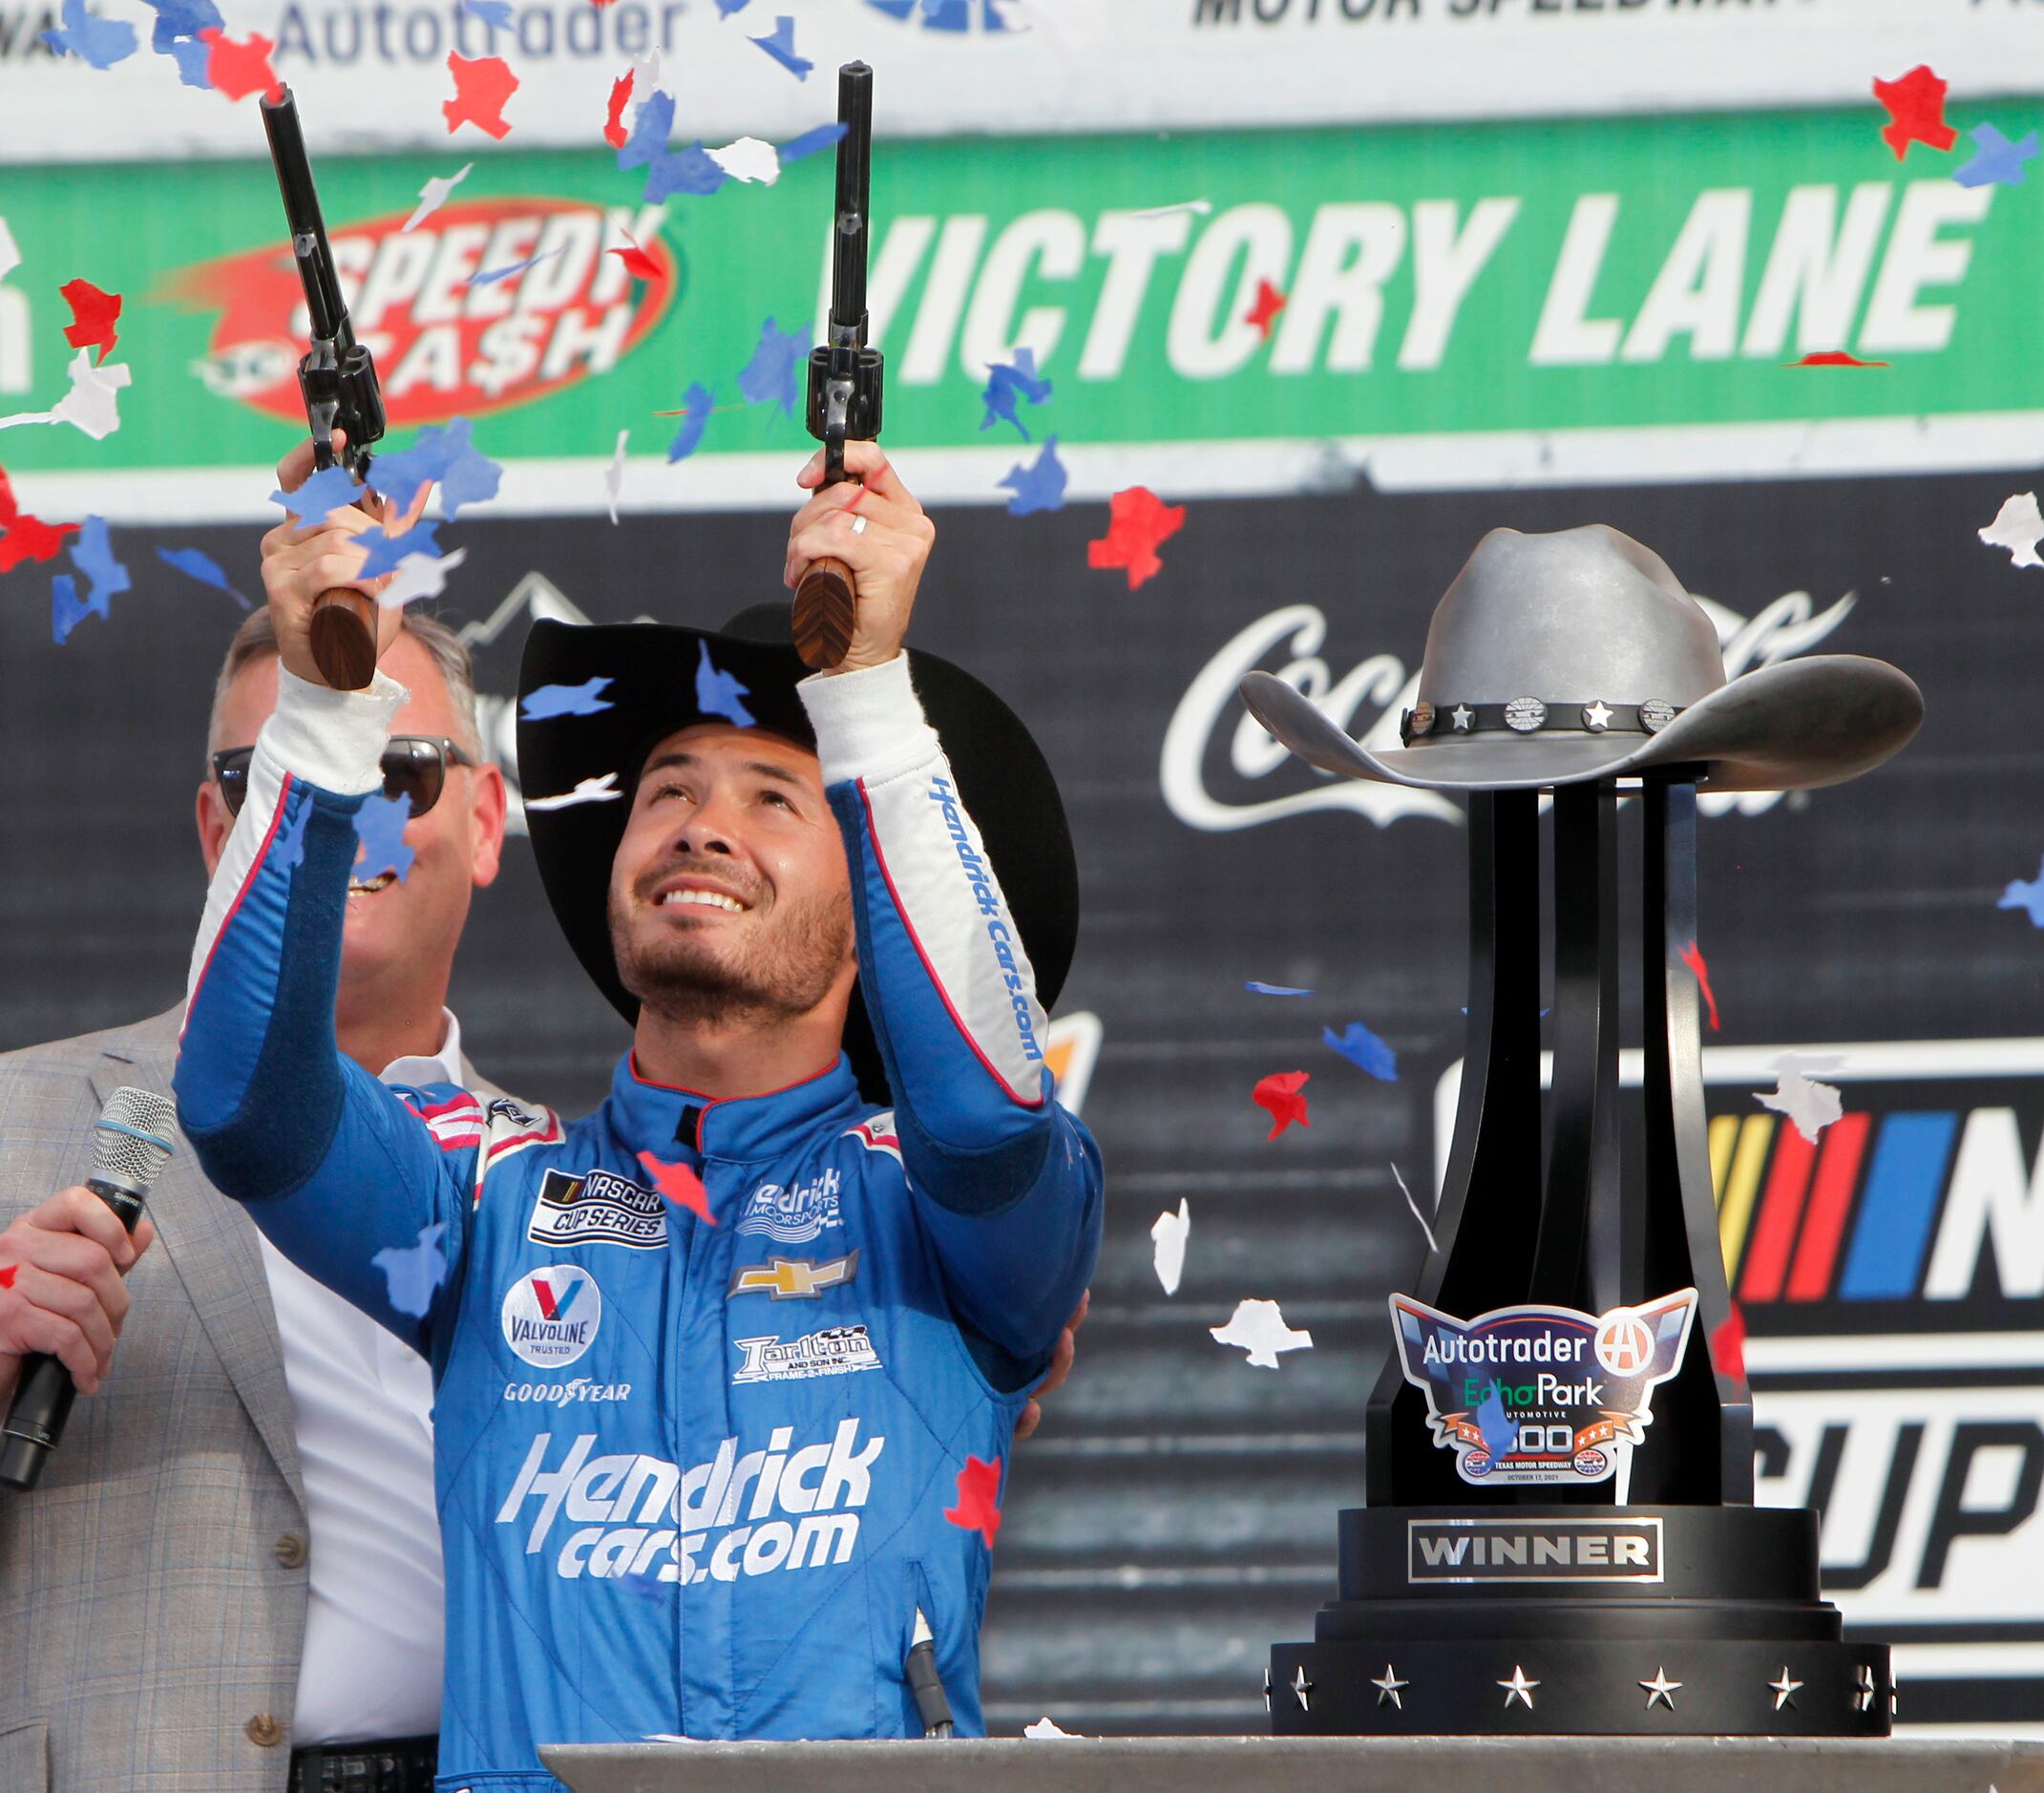 Kyle Larson fires a pair of pistols as he celebrates his win on Victory Lane. The NASCAR...